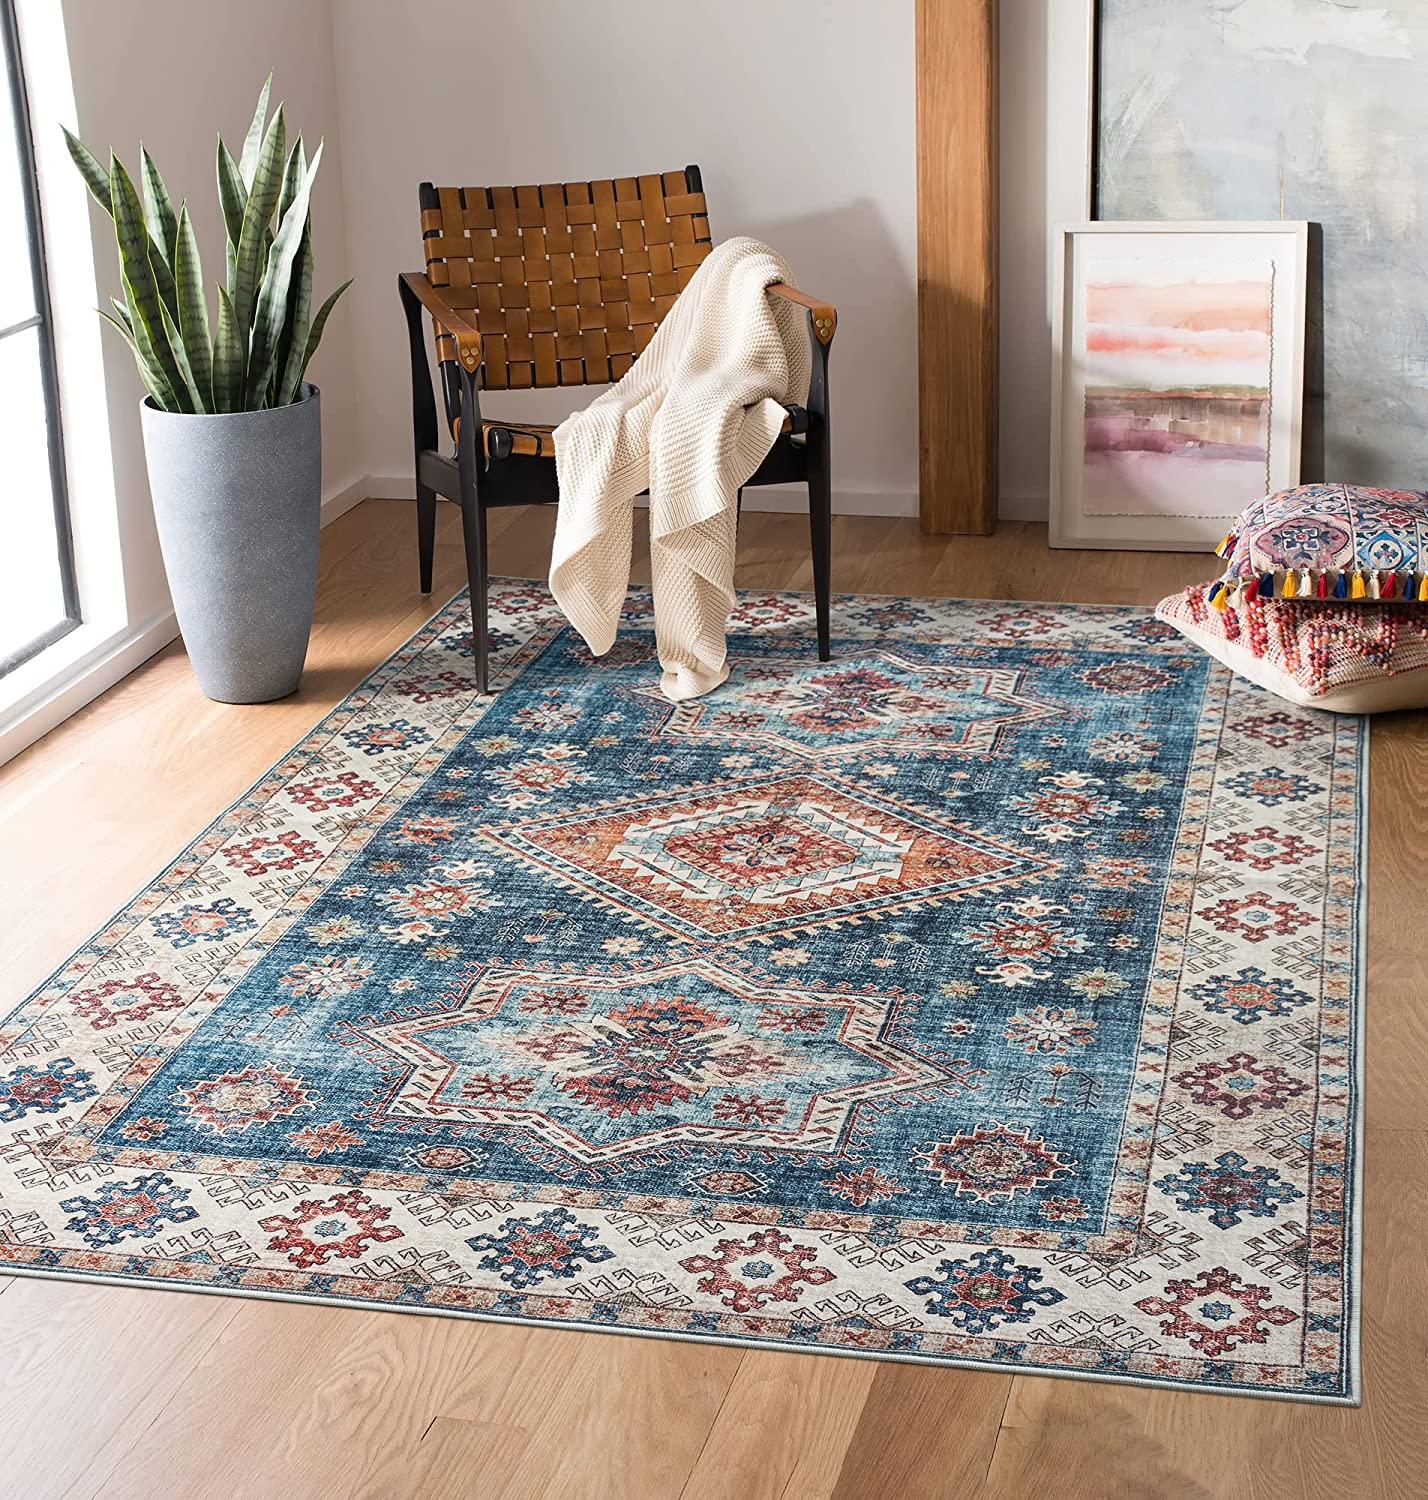 living_room_Floor_Rugs_for_Every_Budget:_Affordable_Options_for_Every_Style